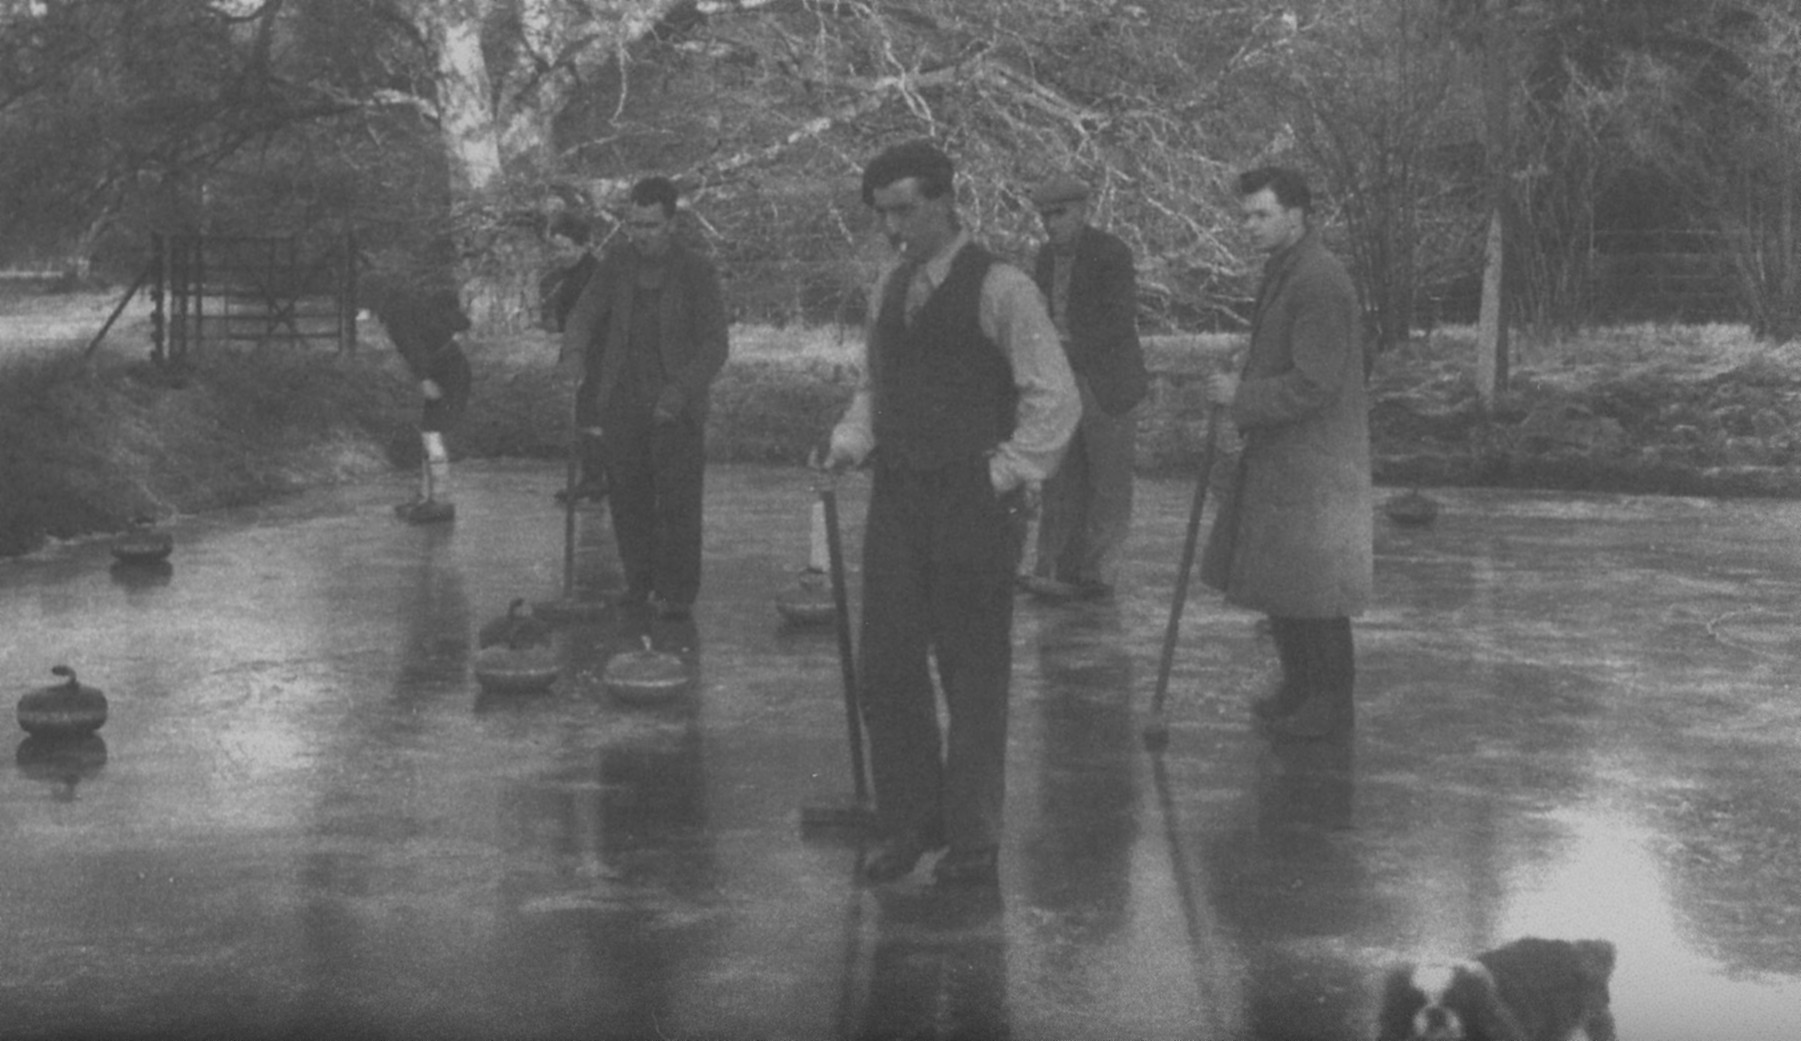 Curling on the curling pond at Ardkinglas